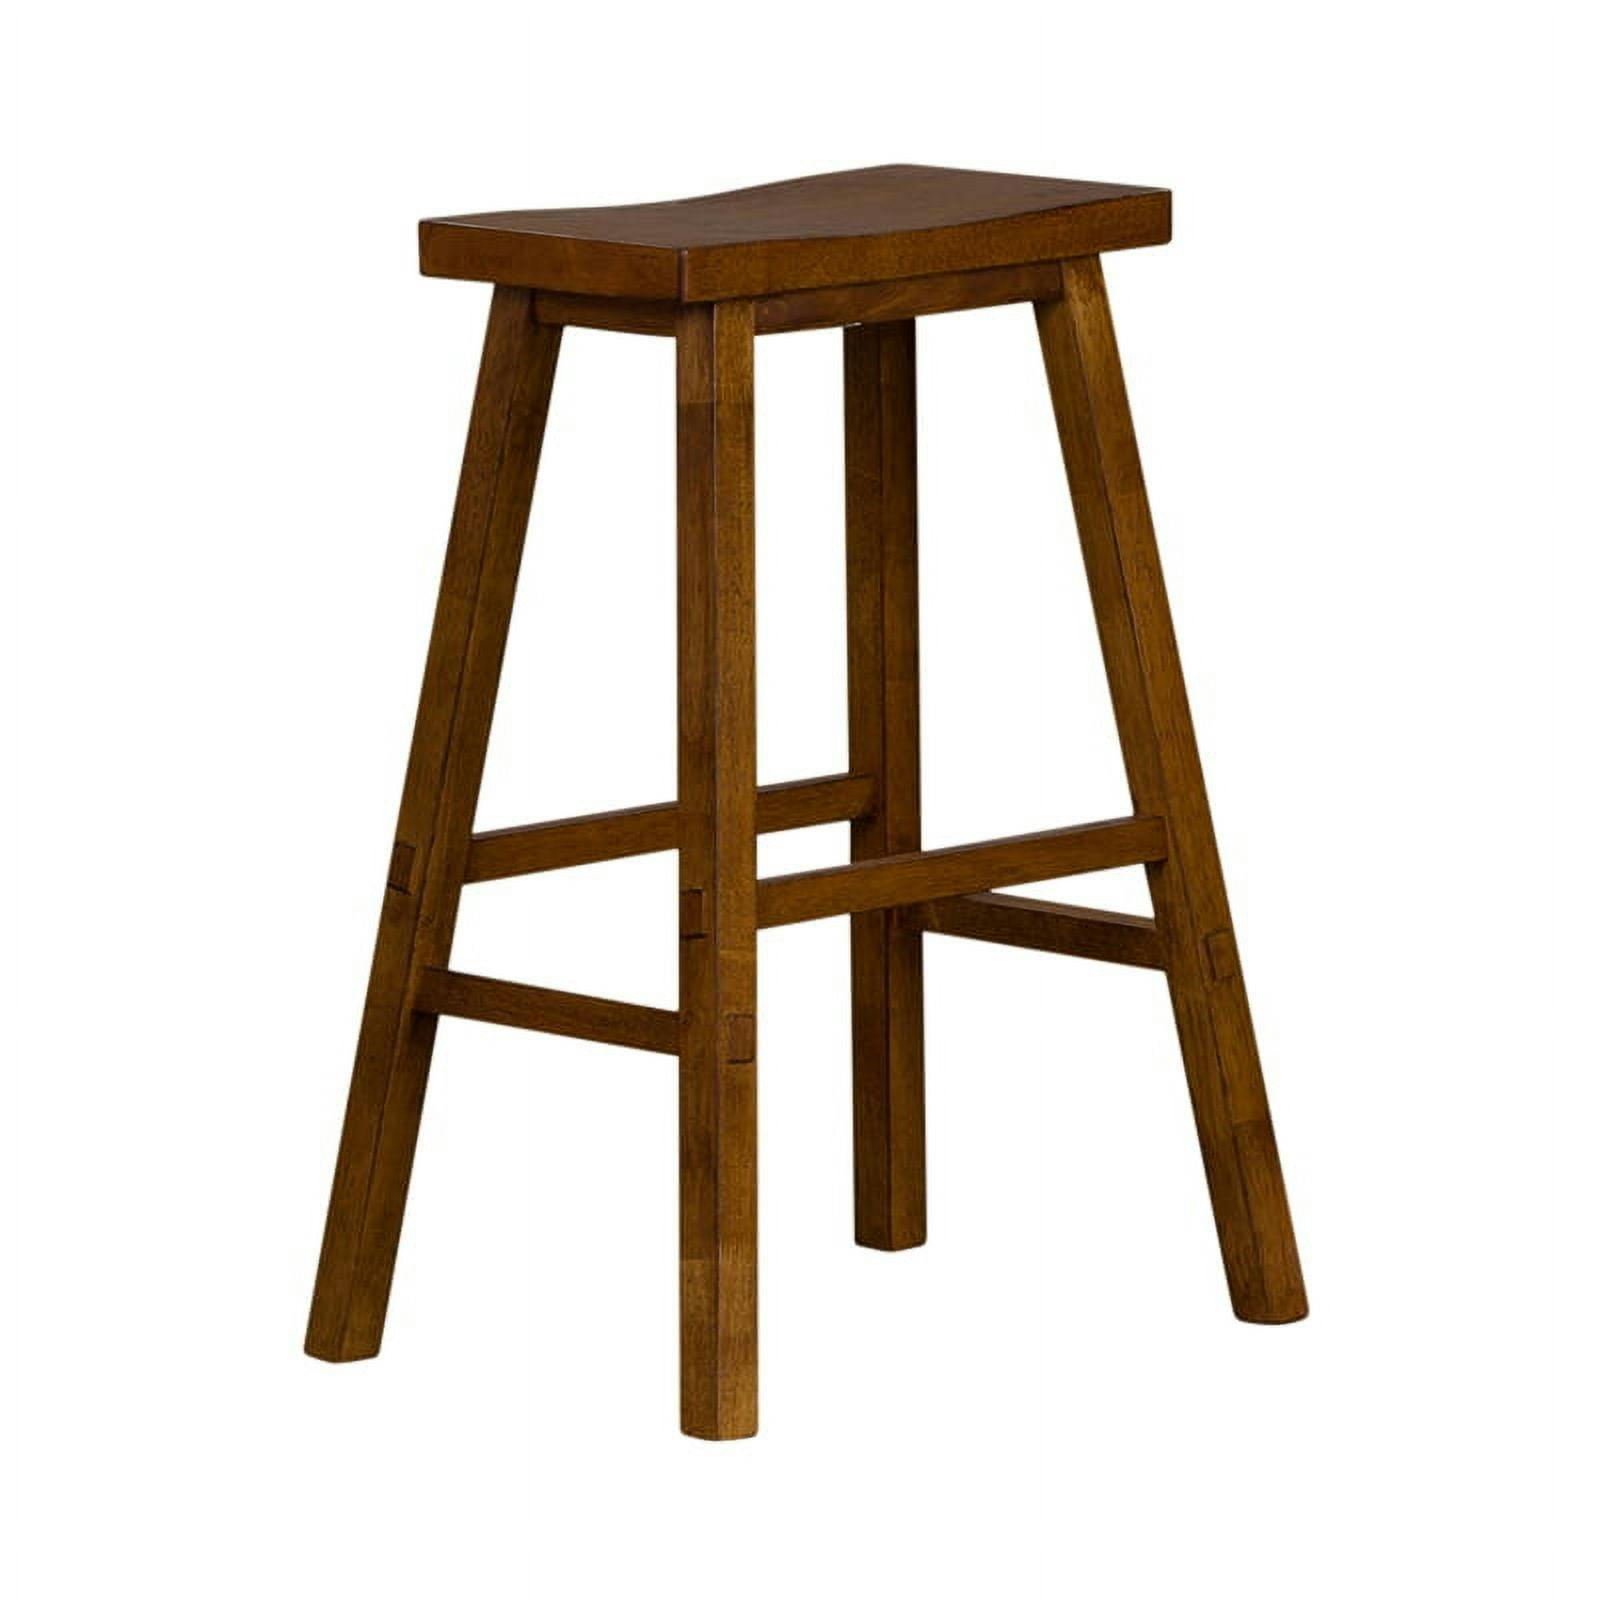 Traditional Tobacco Brown Sawhorse Counter Stool 30"